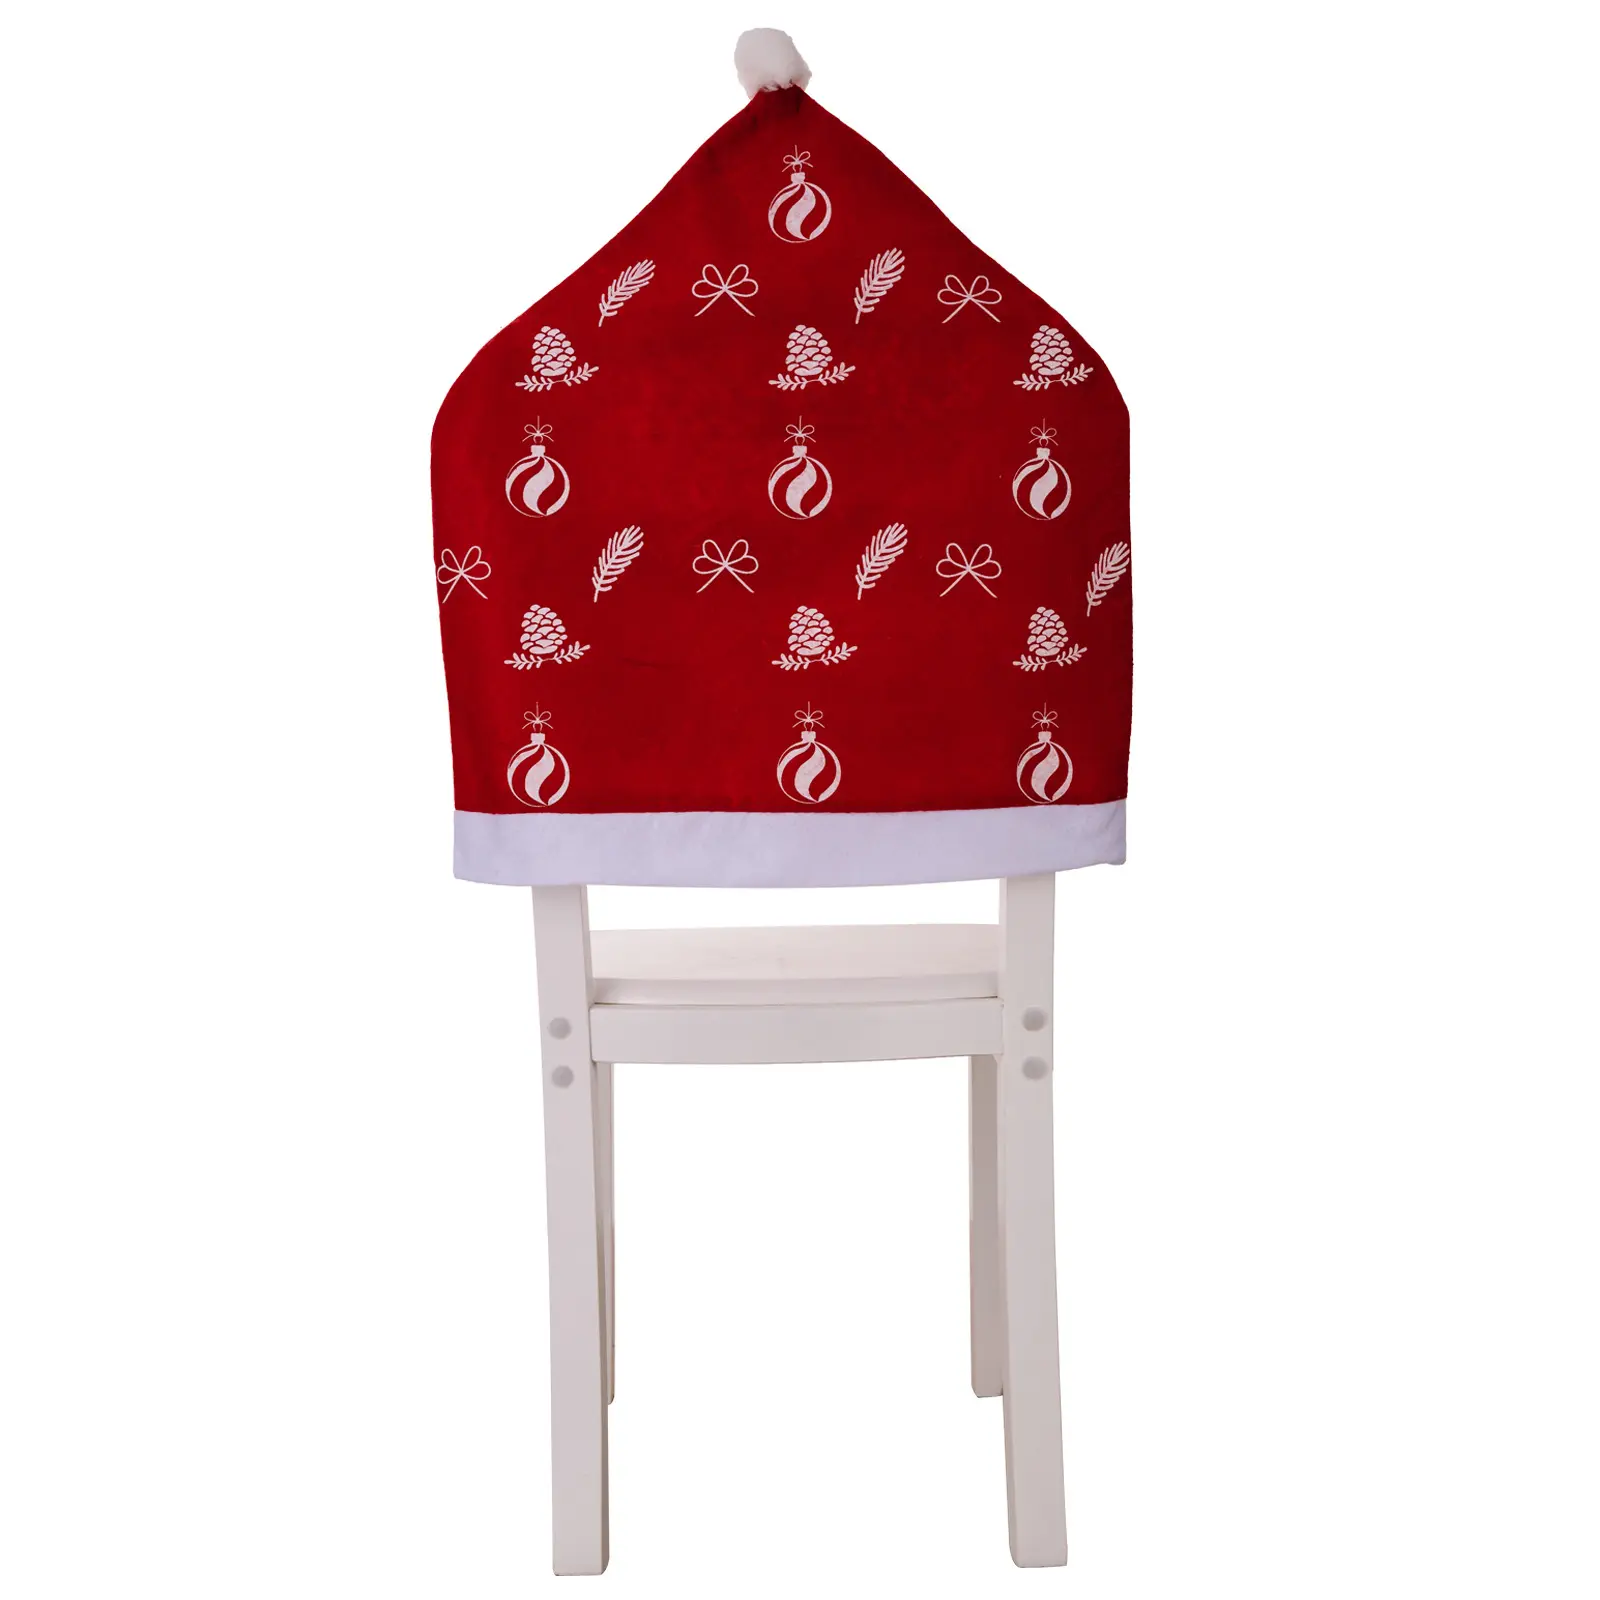 HB-014 Felt red Christmas Chair Back Covers for Christmas Dining Room Kitchen Wedding Party Decor